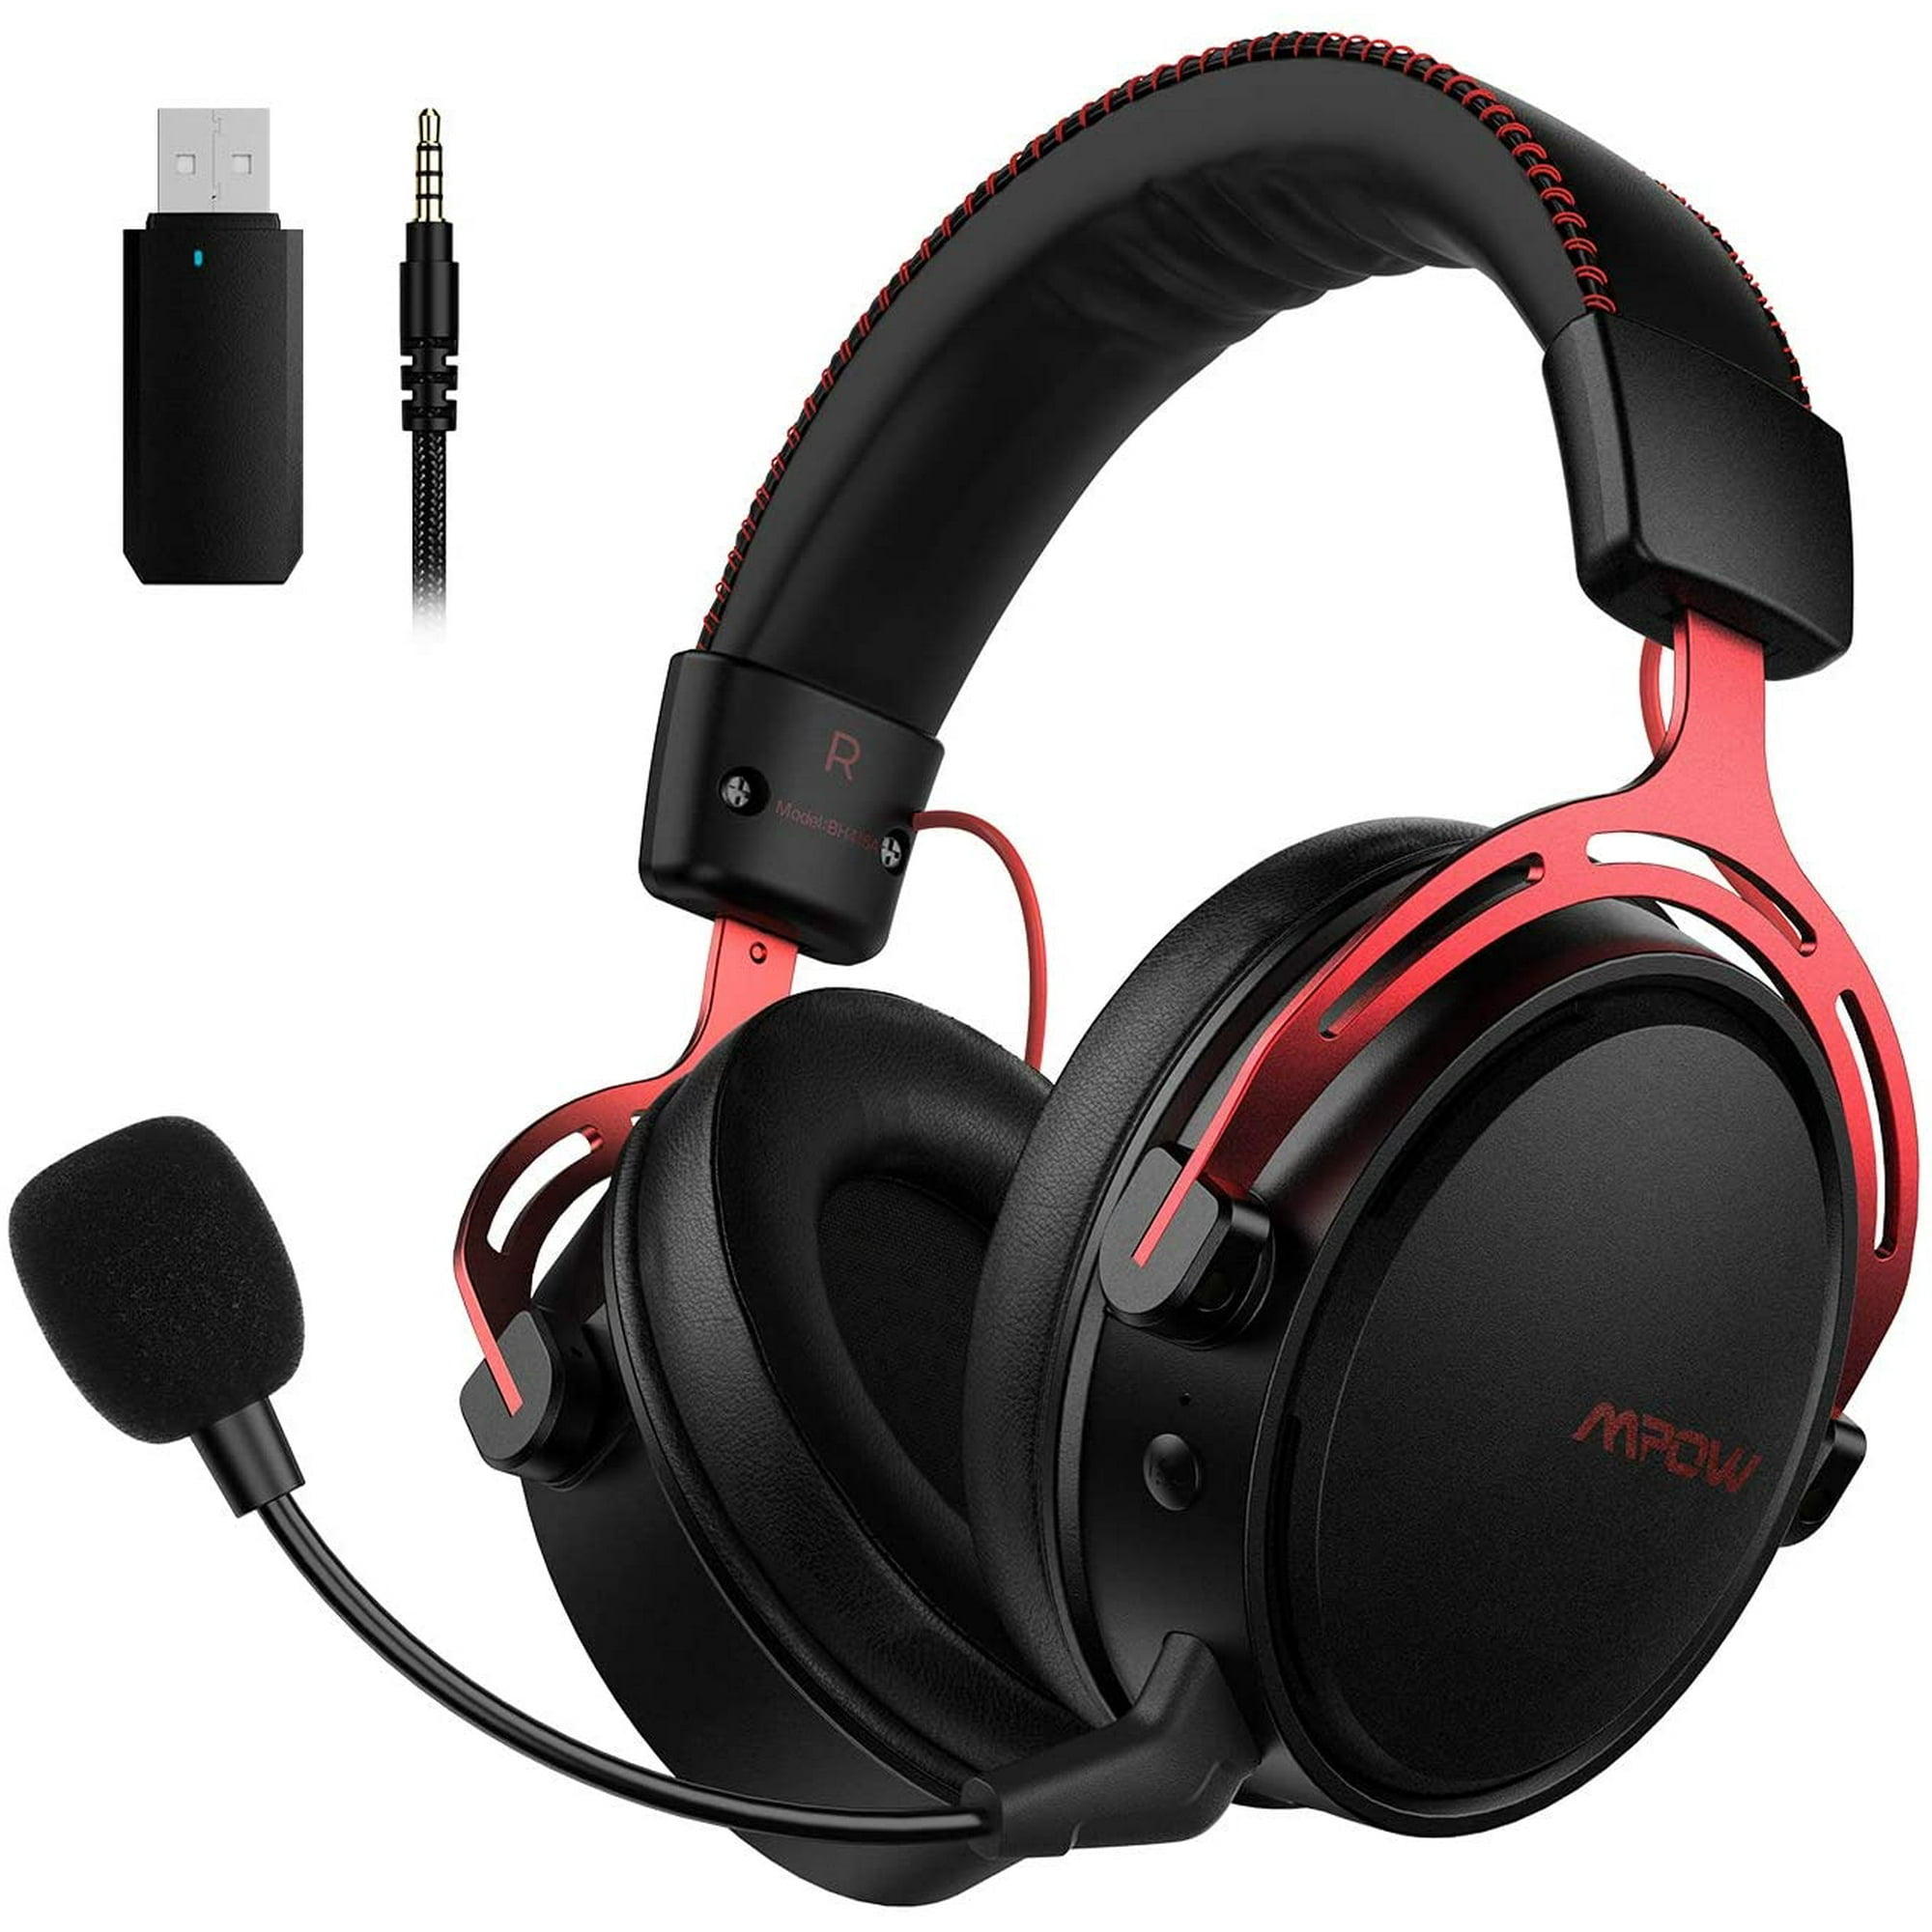 Plaske ødelagte Indflydelsesrig Mpow Air 2.4G Wireless Gaming Headset for PS4/PC Computer Headset with Dual  Chamber Driver,17-Hour of Wireless Use(Wired Optional), Detachable Noise  Cancelling Mic, Bass, Over-Ear Gaming Headphones | Walmart Canada